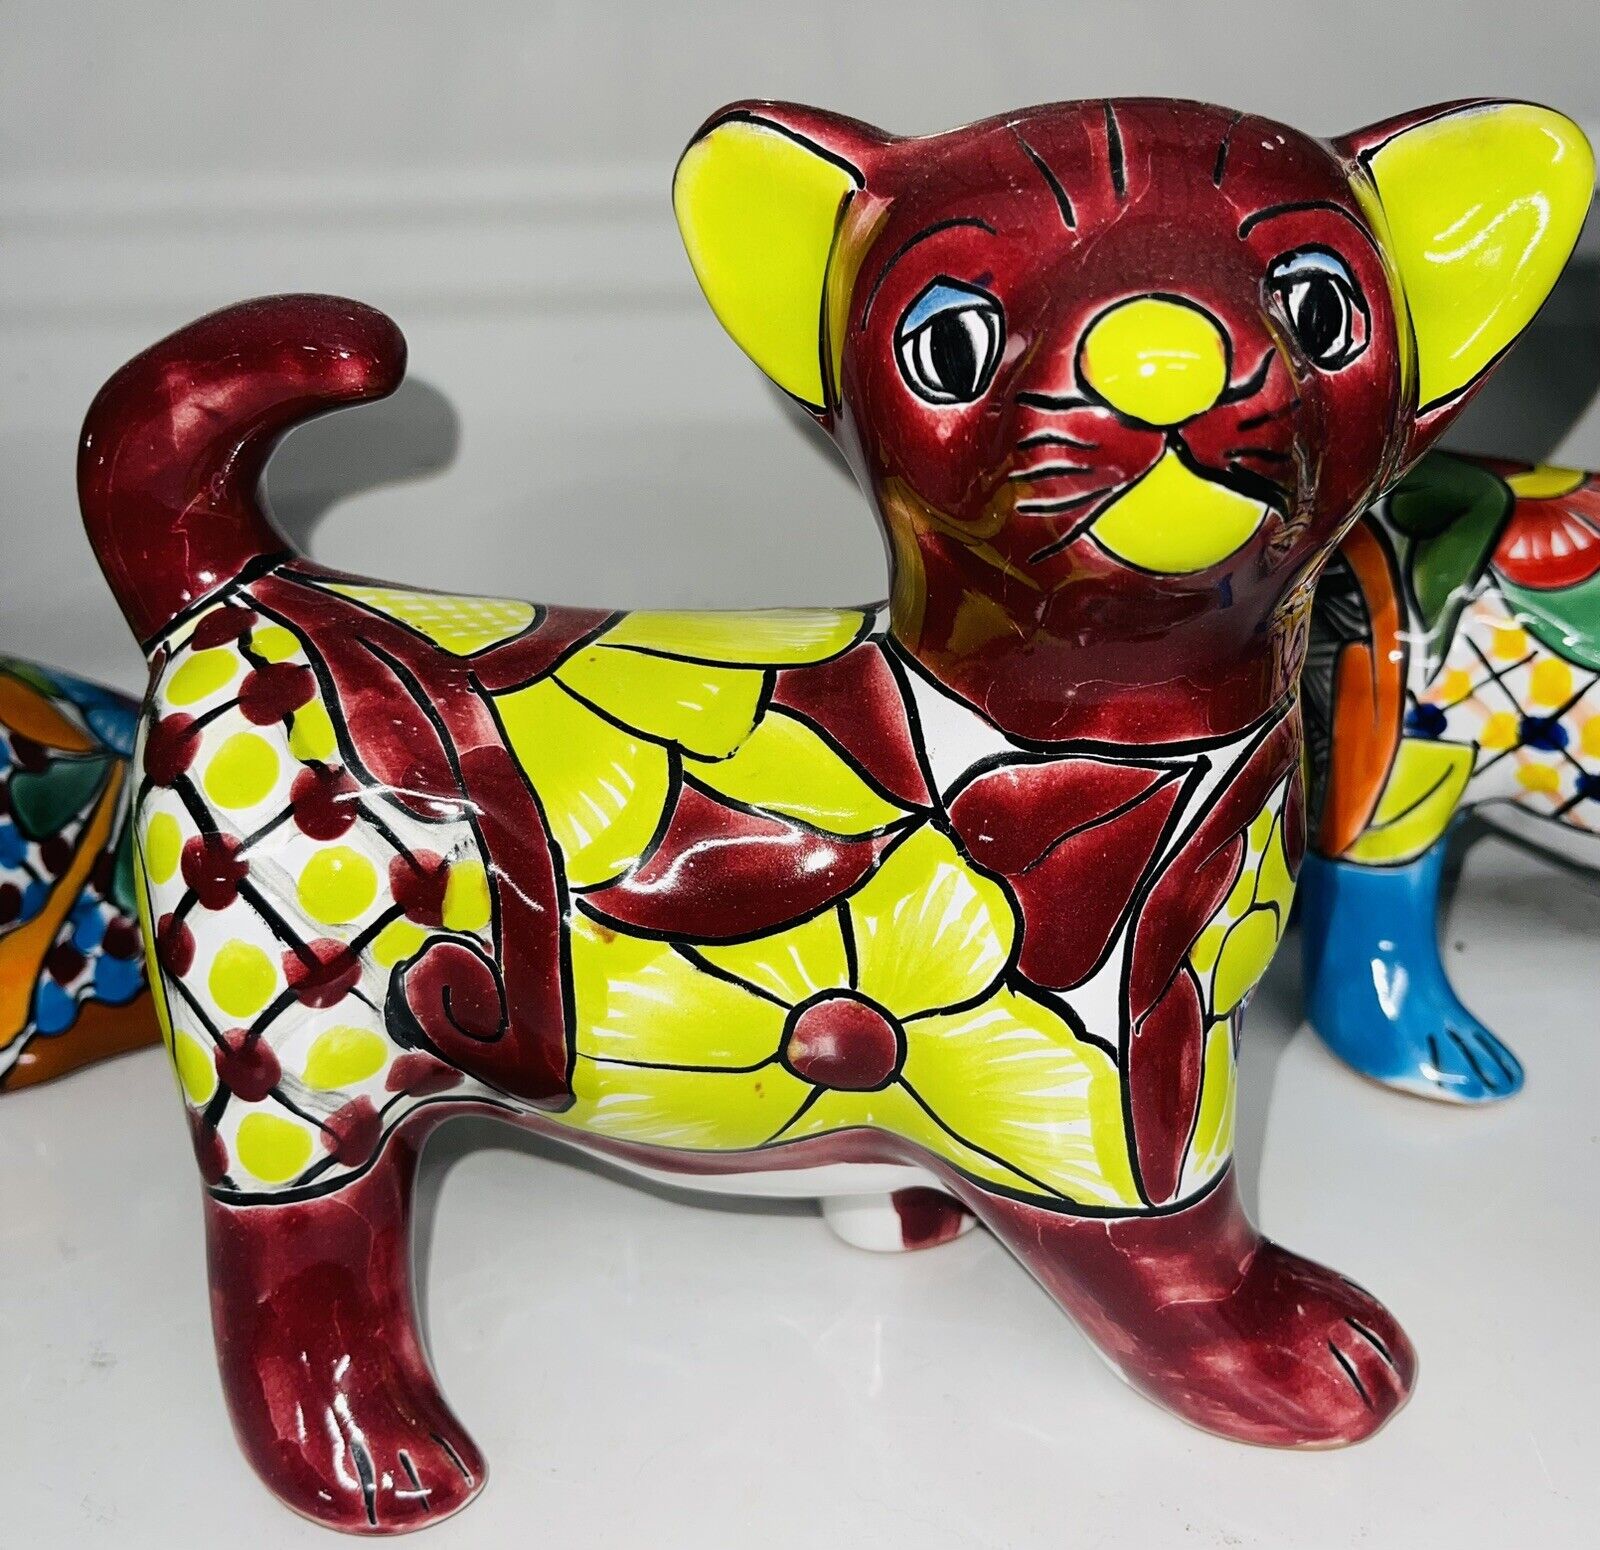 MEXICAN TALAVERA POTTERY CHIHUAHUA DOG SCULPTURE 9 x 7.5 IN HANDPAINTED